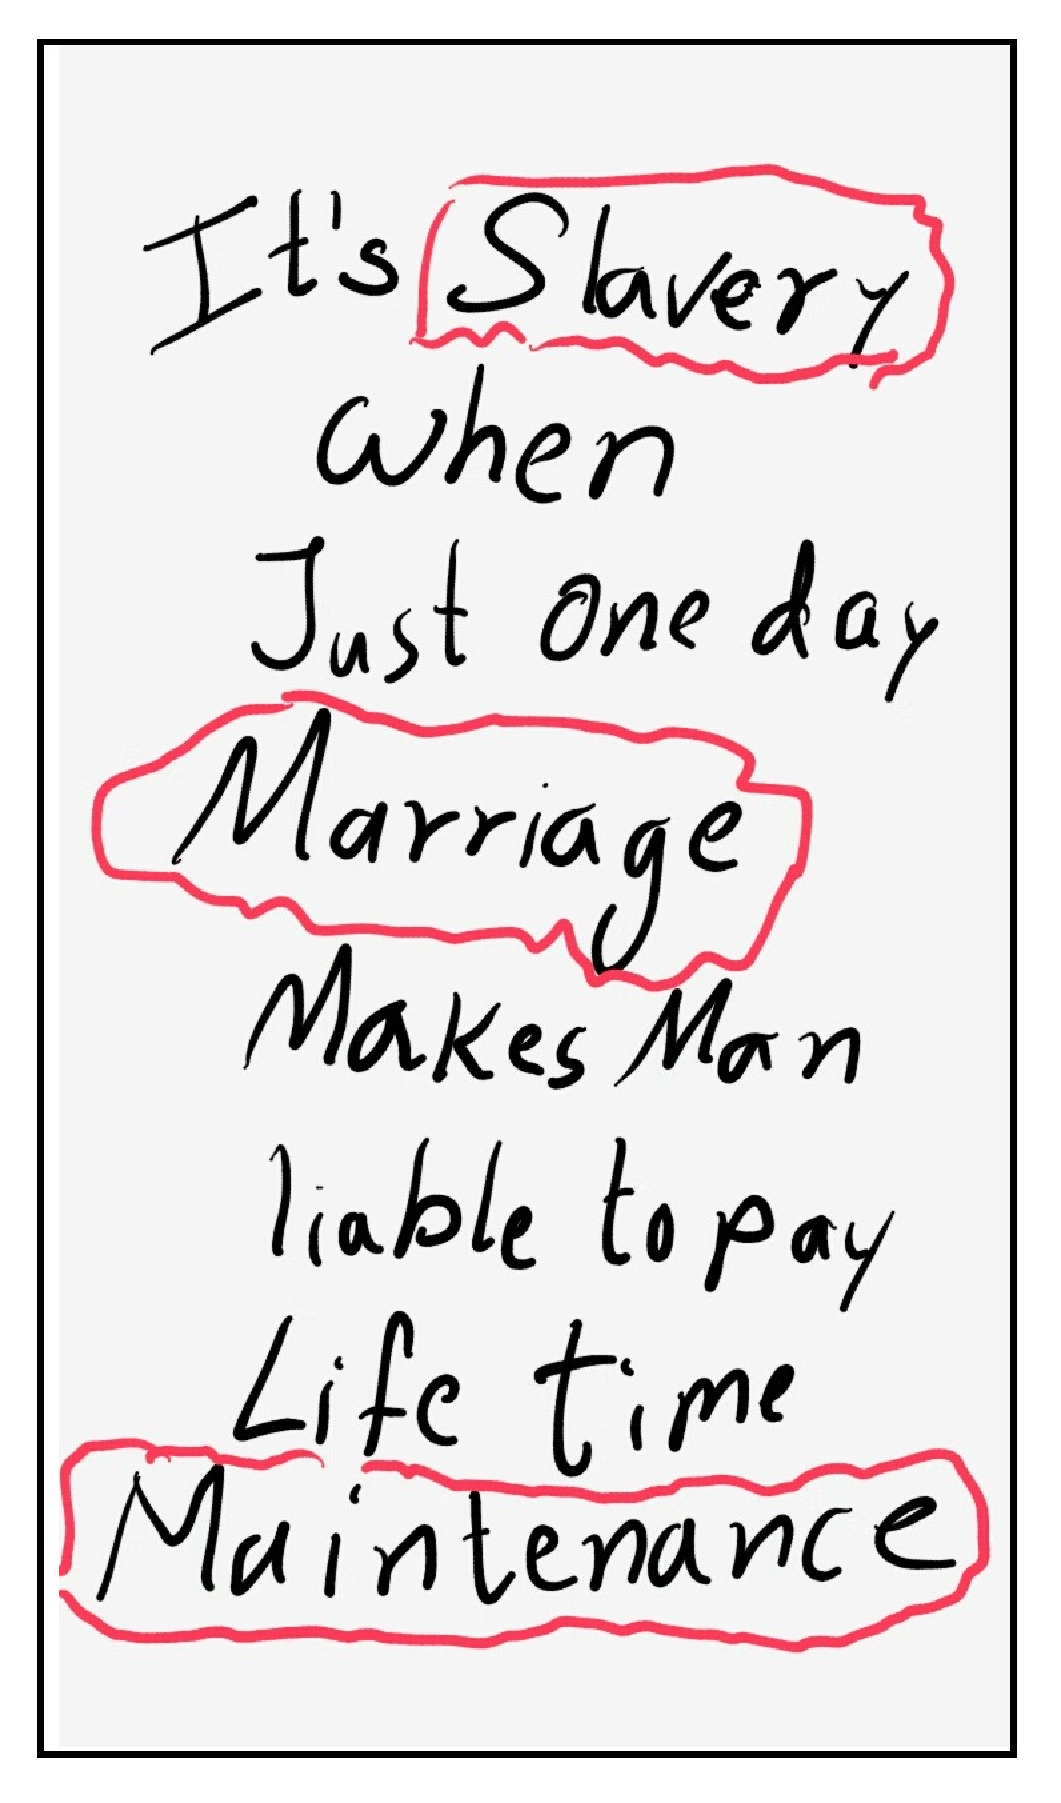 Its slavery when one day marriage equals lifetime maintenance